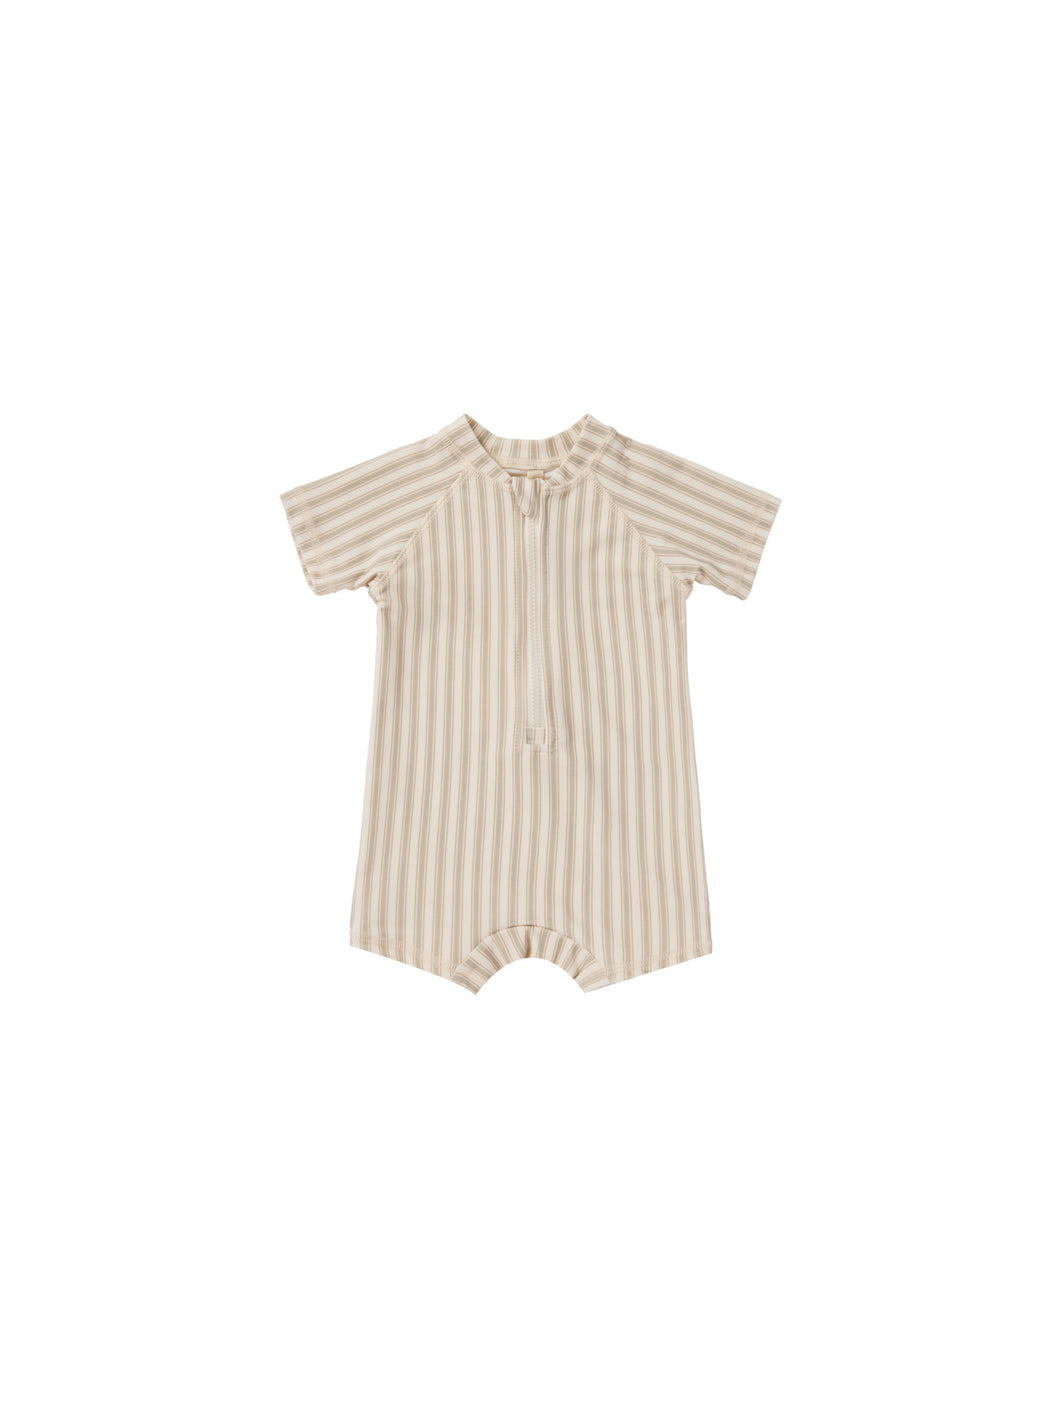 Zip up one piece short sleeve rash guard featured in an ivory colour and aqua and oranges stripes for a vintage look.